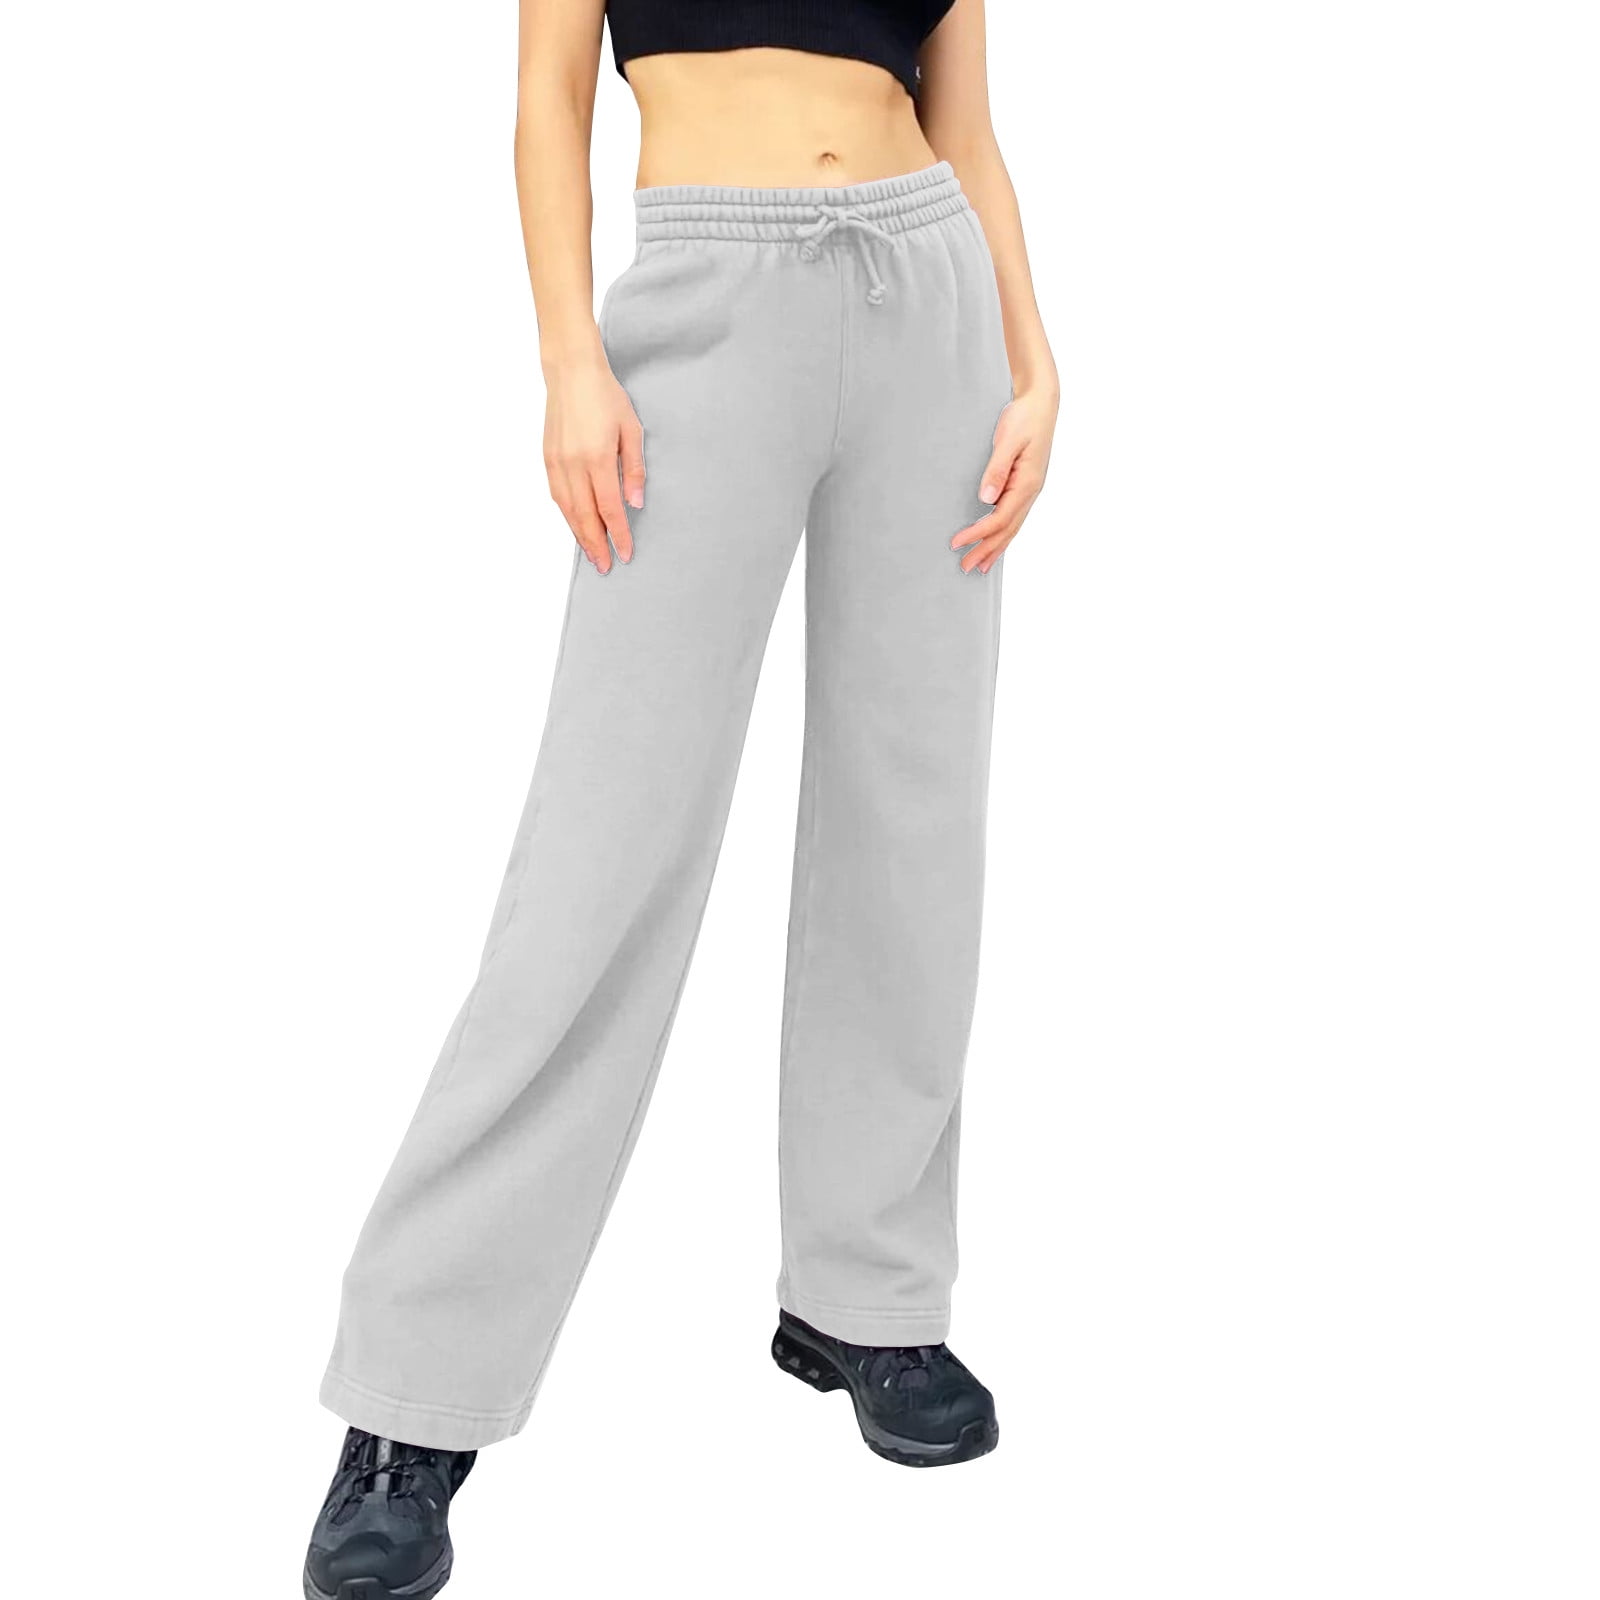 Susanny Petite Sweatpants for Women Petite Straight Leg Drawstring Baggy  Lounge Pants Fleece Lined Lightweight with Pockets High Waisted High Rise